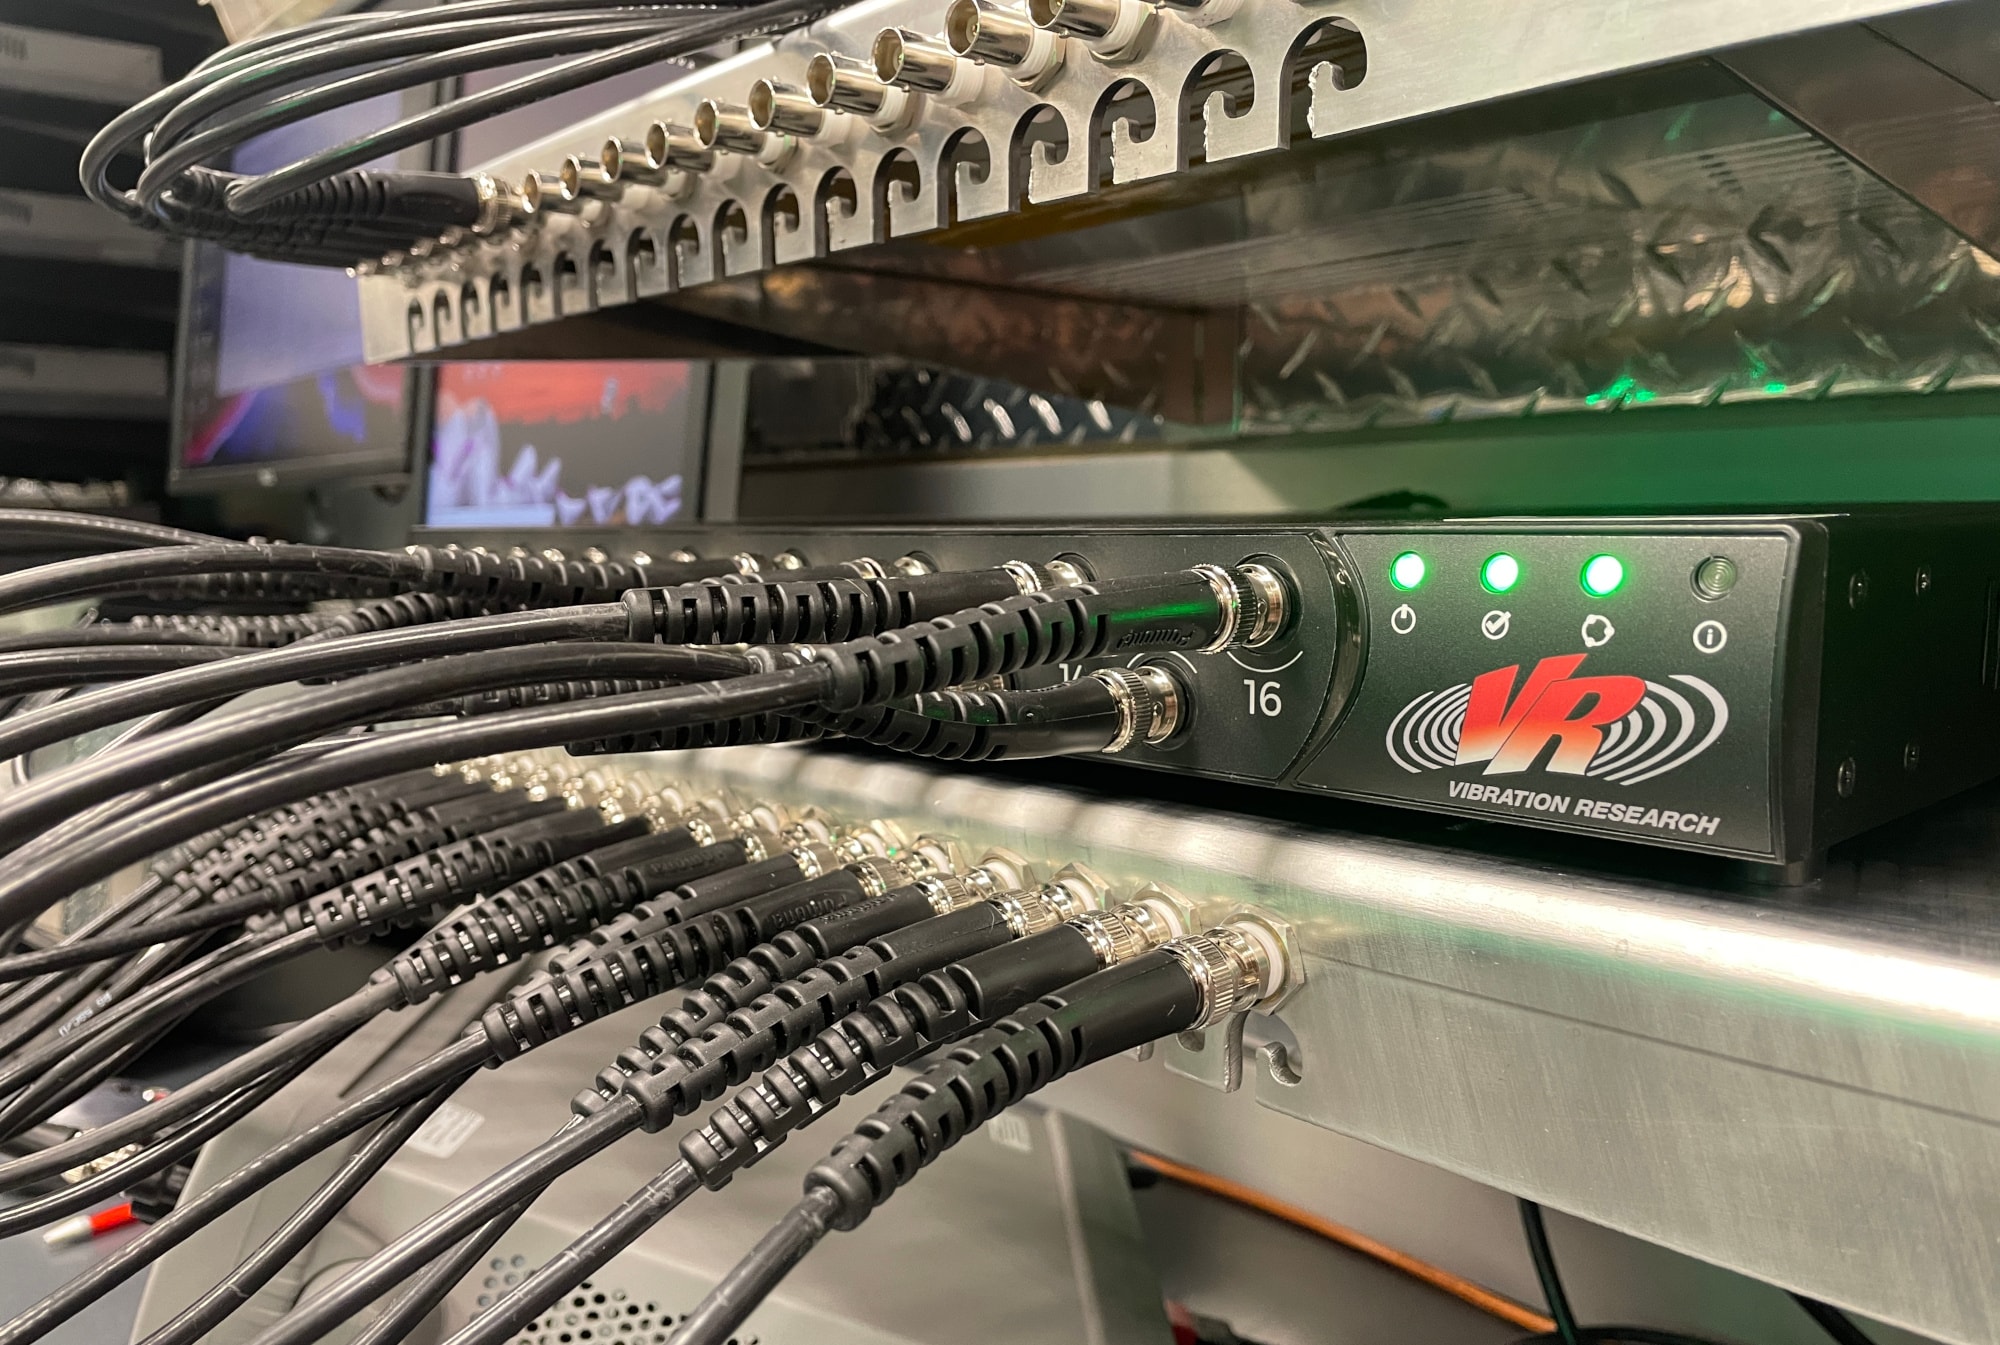 A VR10500 vibration controller on a rack and connected to input cables for calibration.